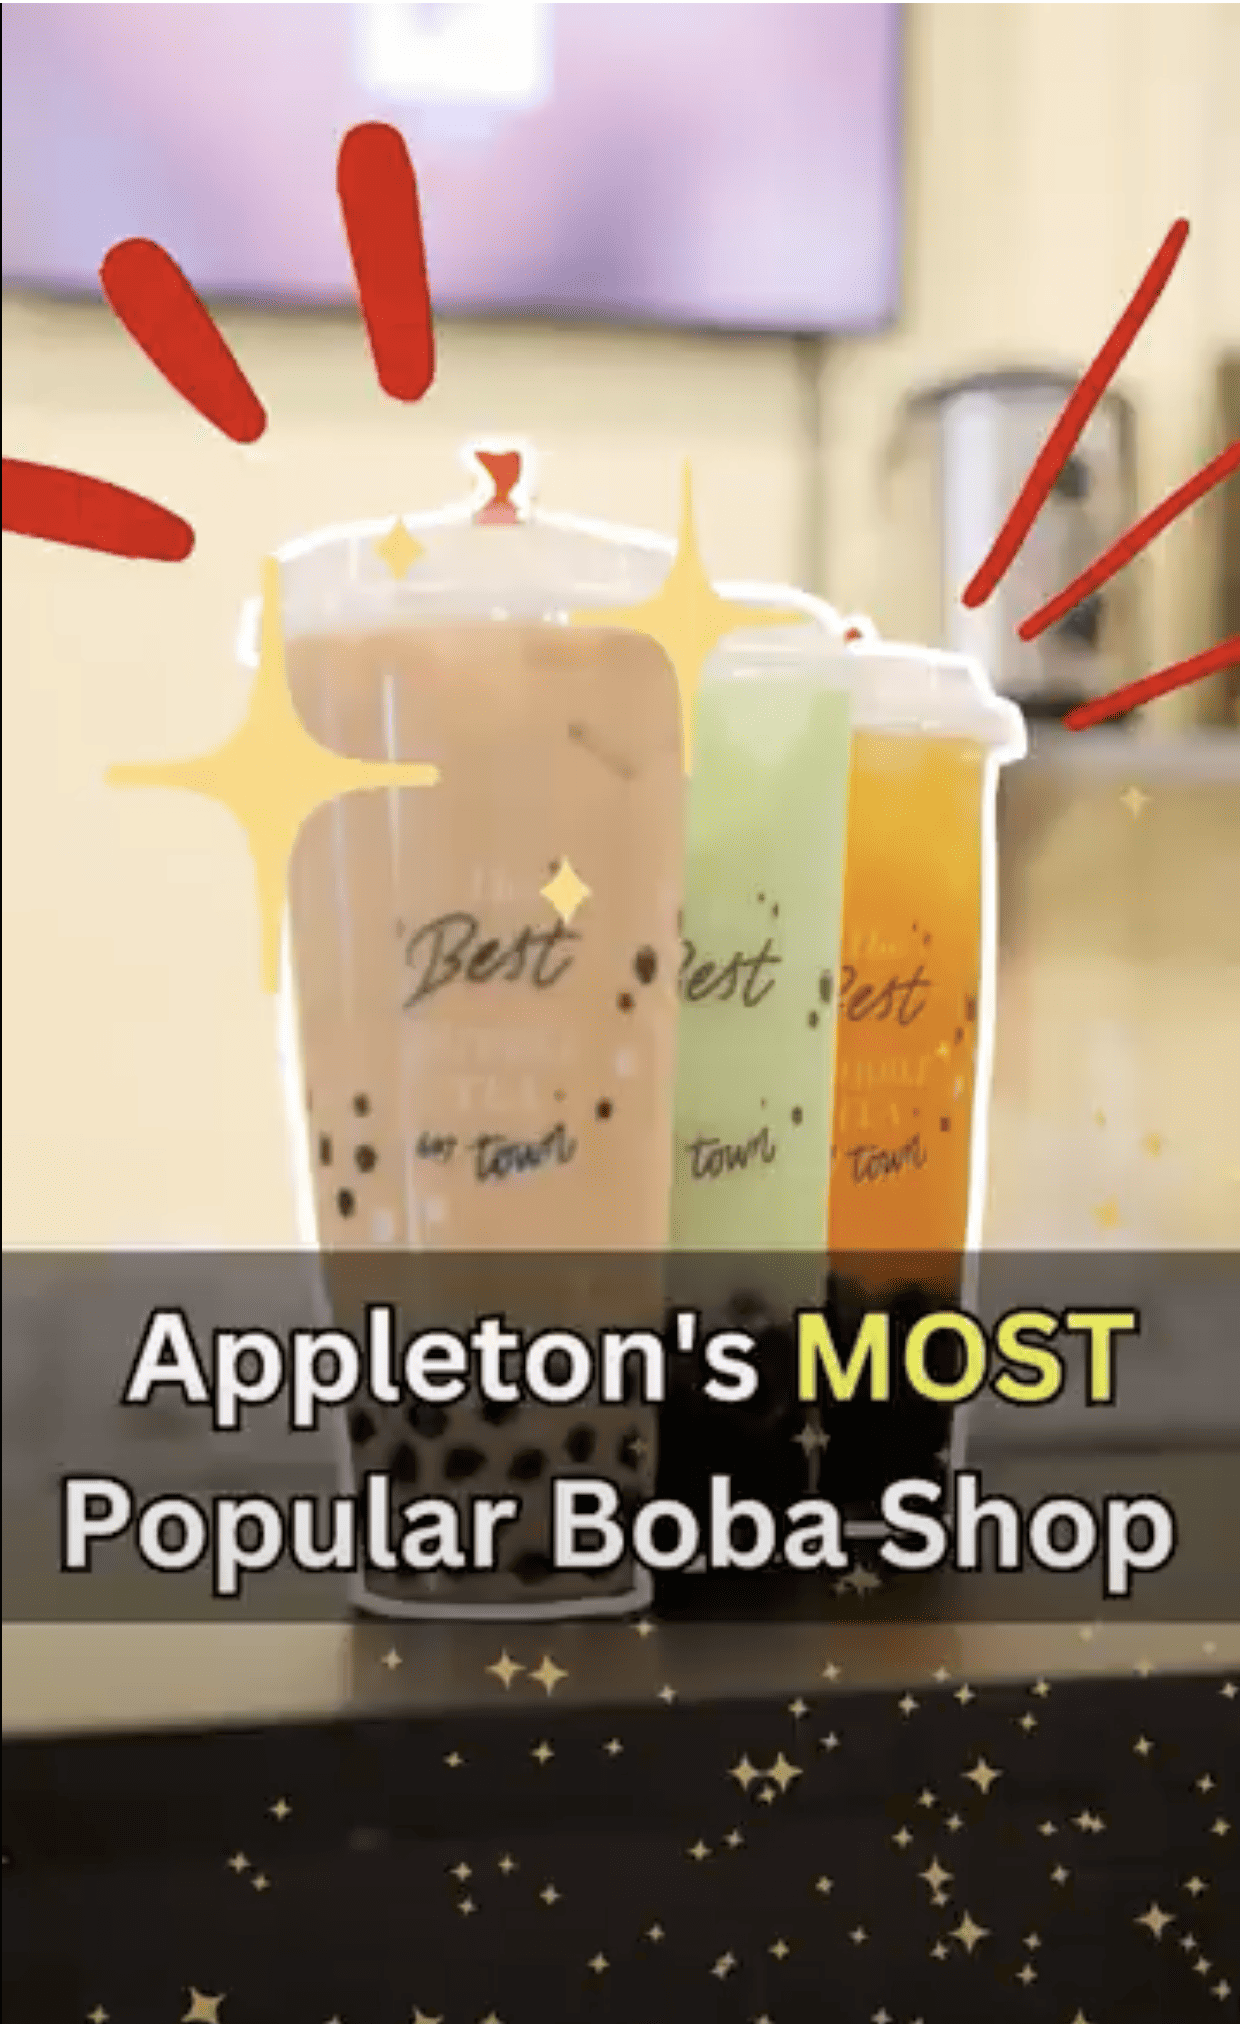 Is this the BEST boba in Appleton?